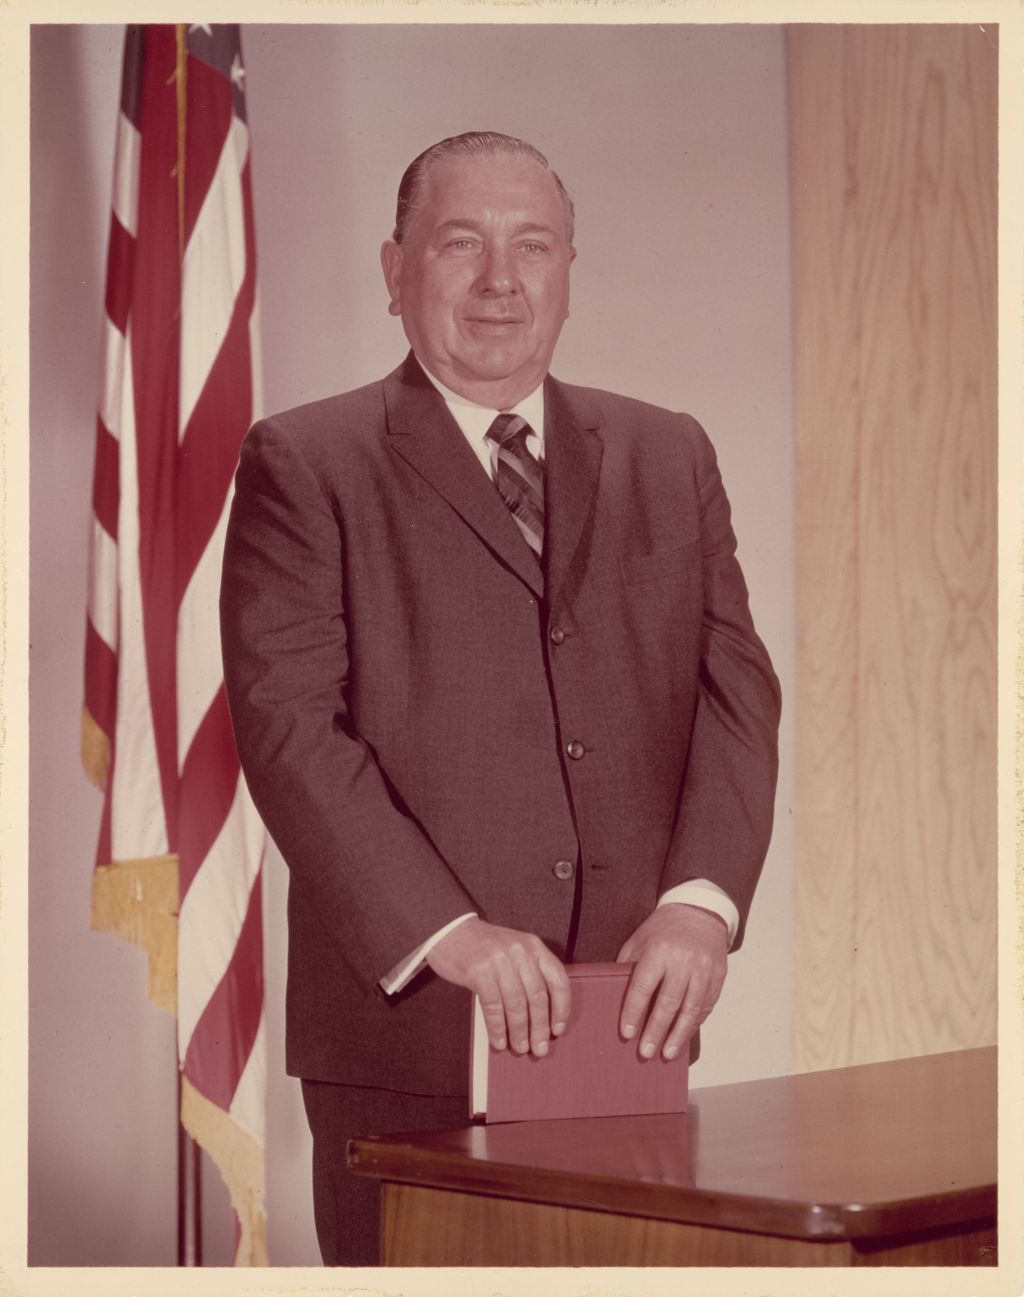 Richard J. Daley with a book and a flag